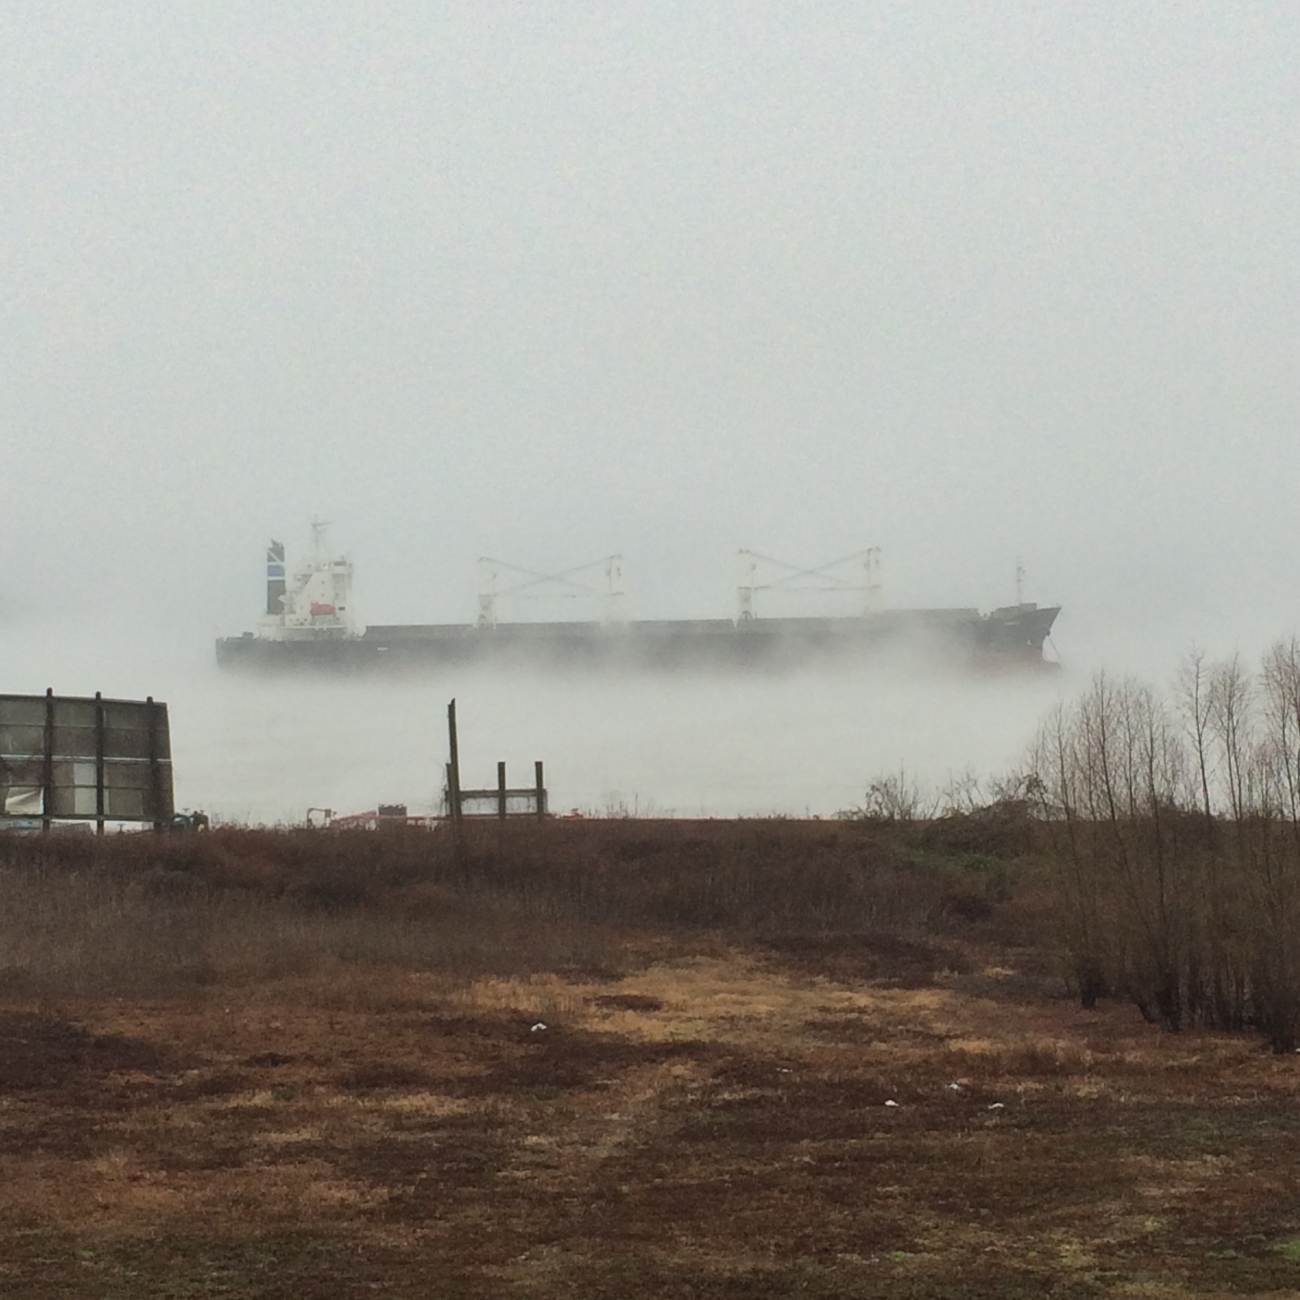 Morning fog hides all but the top of a ship travelling up the Mississippi River